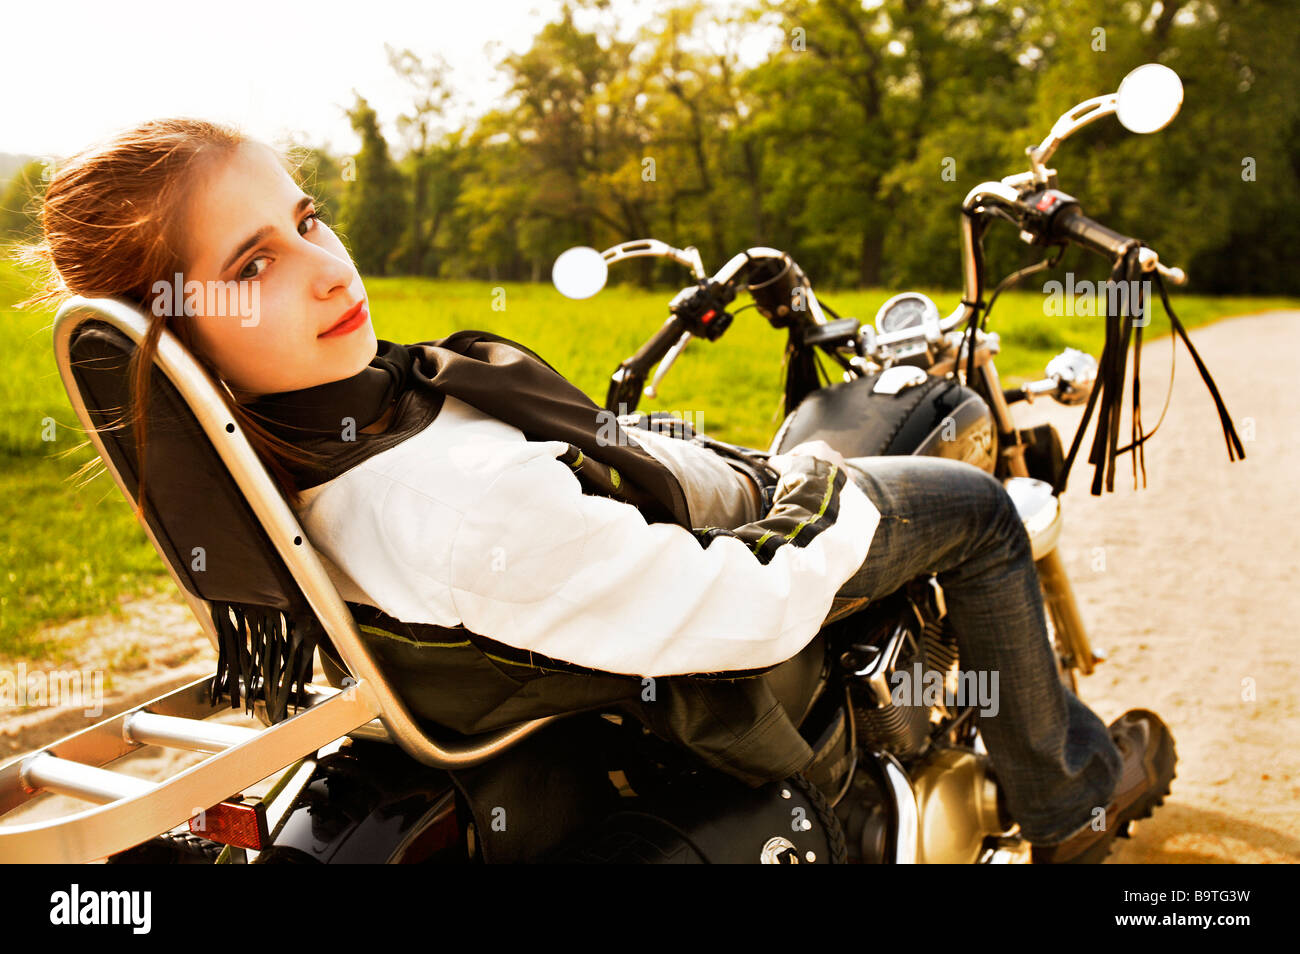 Young Woman relaxing on the motorbike Stock Photo